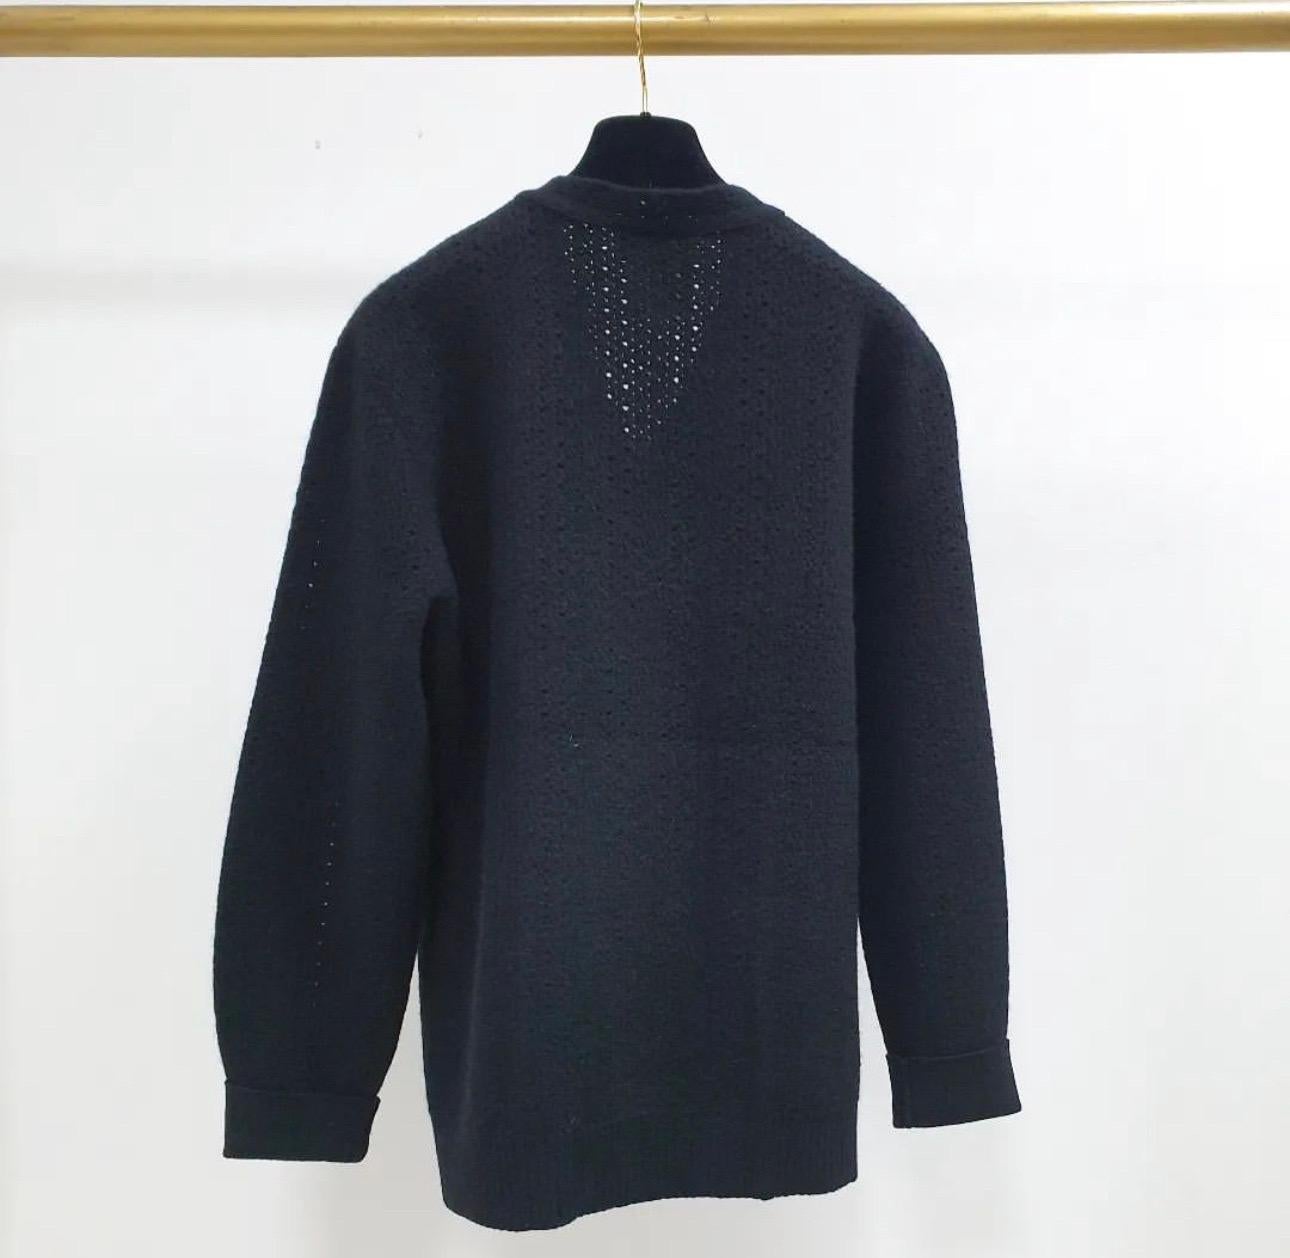 CHANEL 2014 Wool & Sequin Sweater. 
 This special Chanel sweater looks like a two piece but is actually one. 
 This sweater has a slightly open knit and is a medium to heavy weight.
Size mark 36
Very good condition.